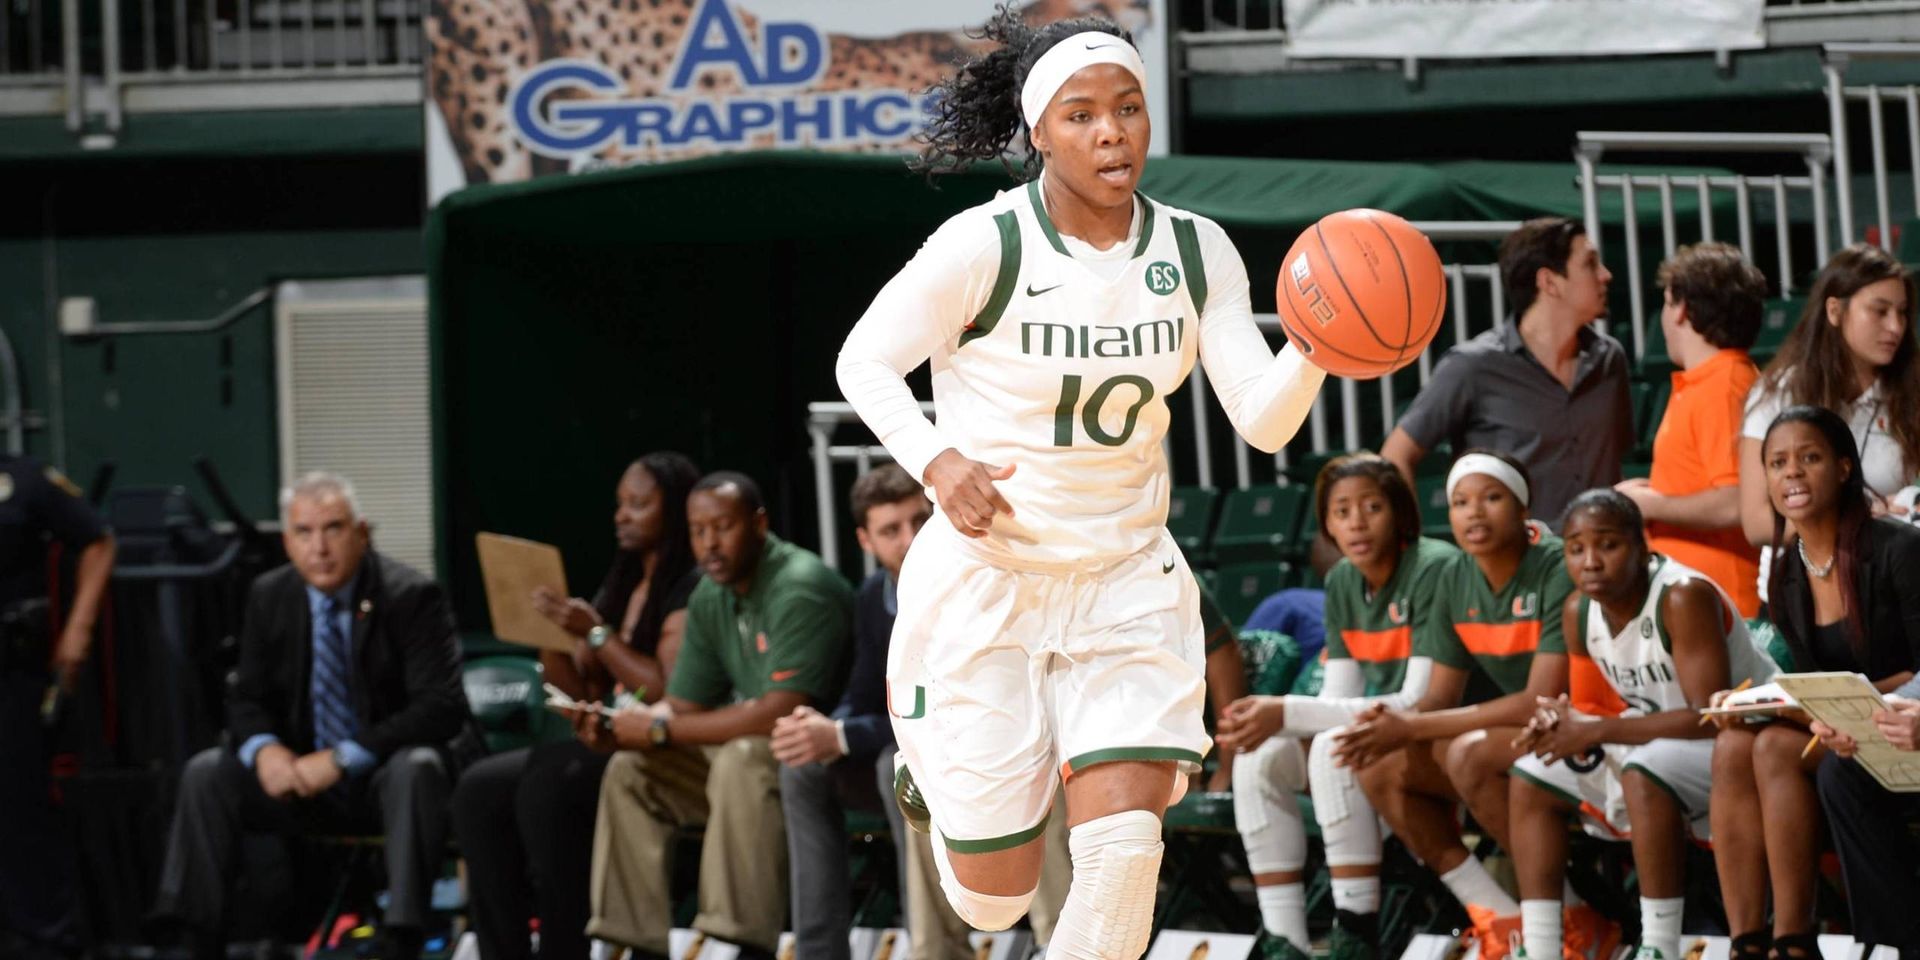 @MiamiWBB Opens DoubleTree Classic with UCLA